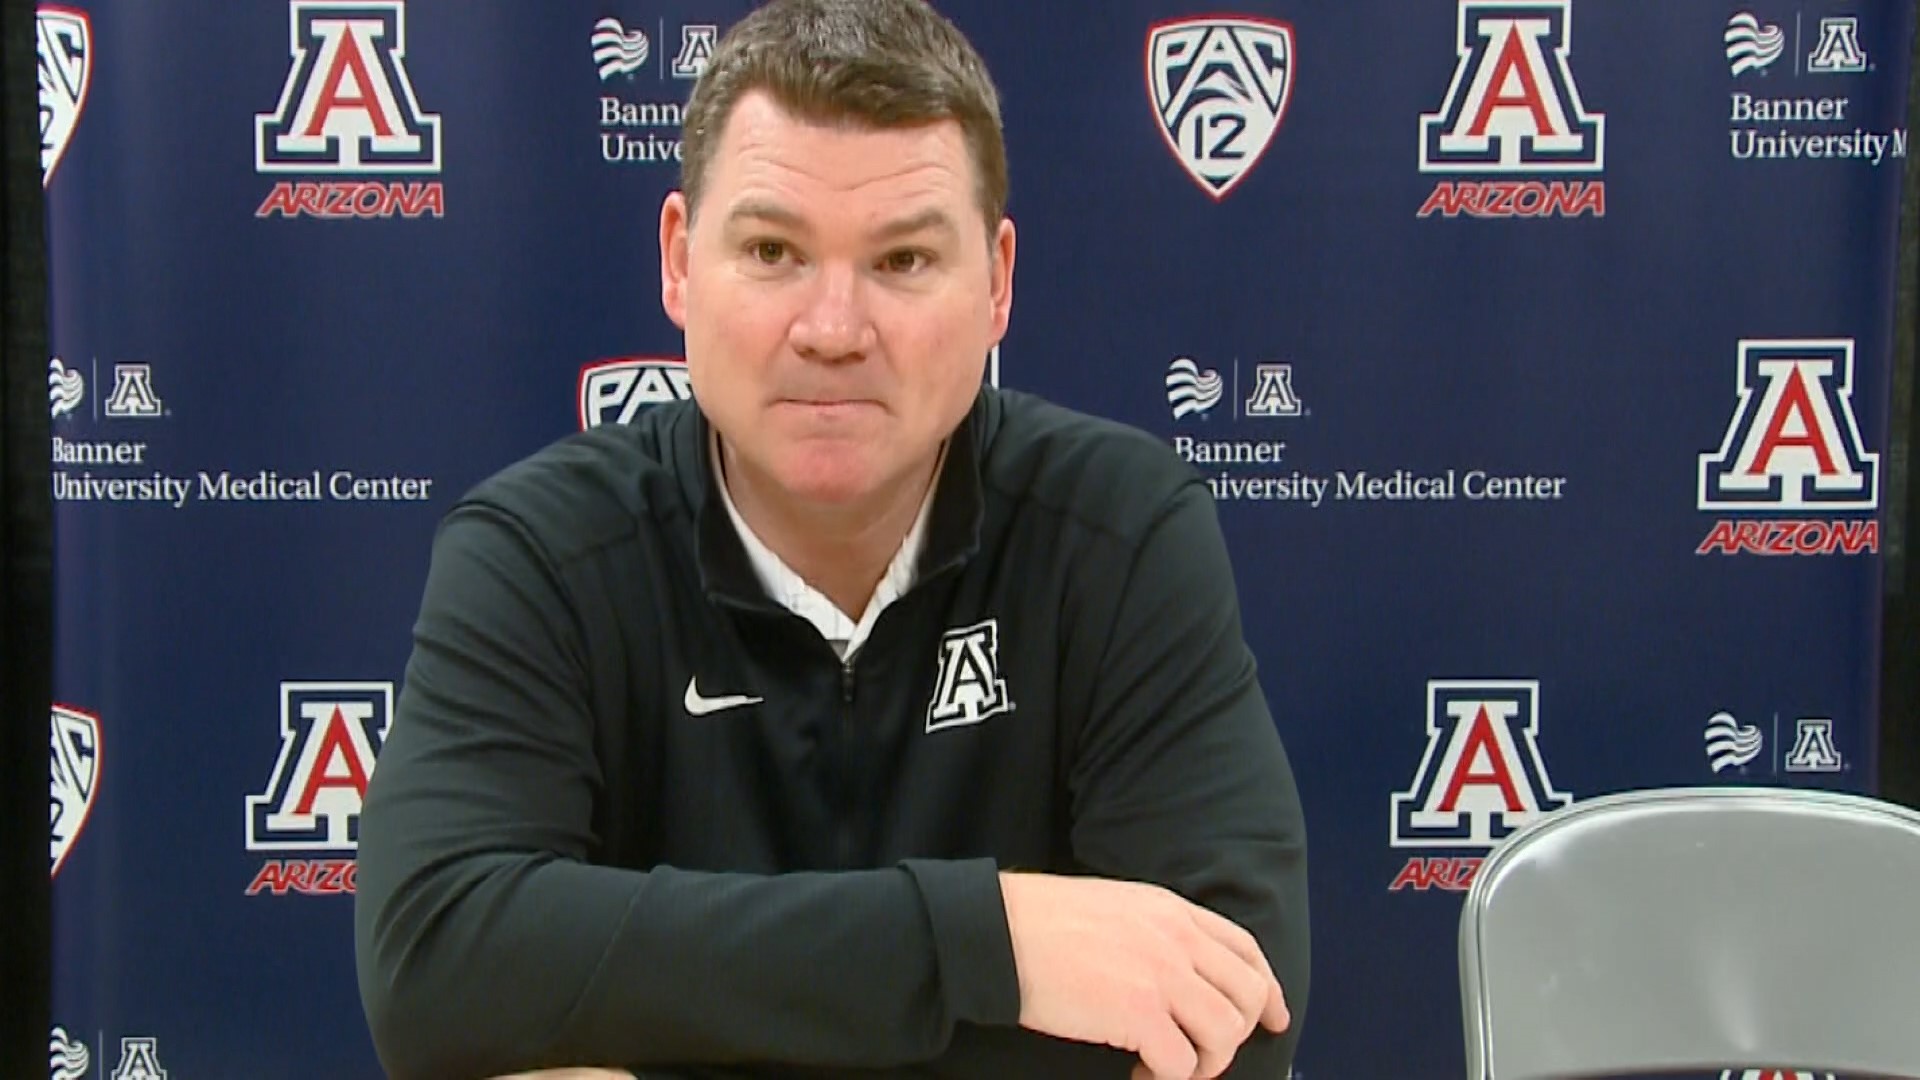 Tommy Lloyd talks with reports after Arizona's win against WSU. Lloyd talks about the Wildcats, returning to Spokane, Gonzaga, and his talks with Mark Few.